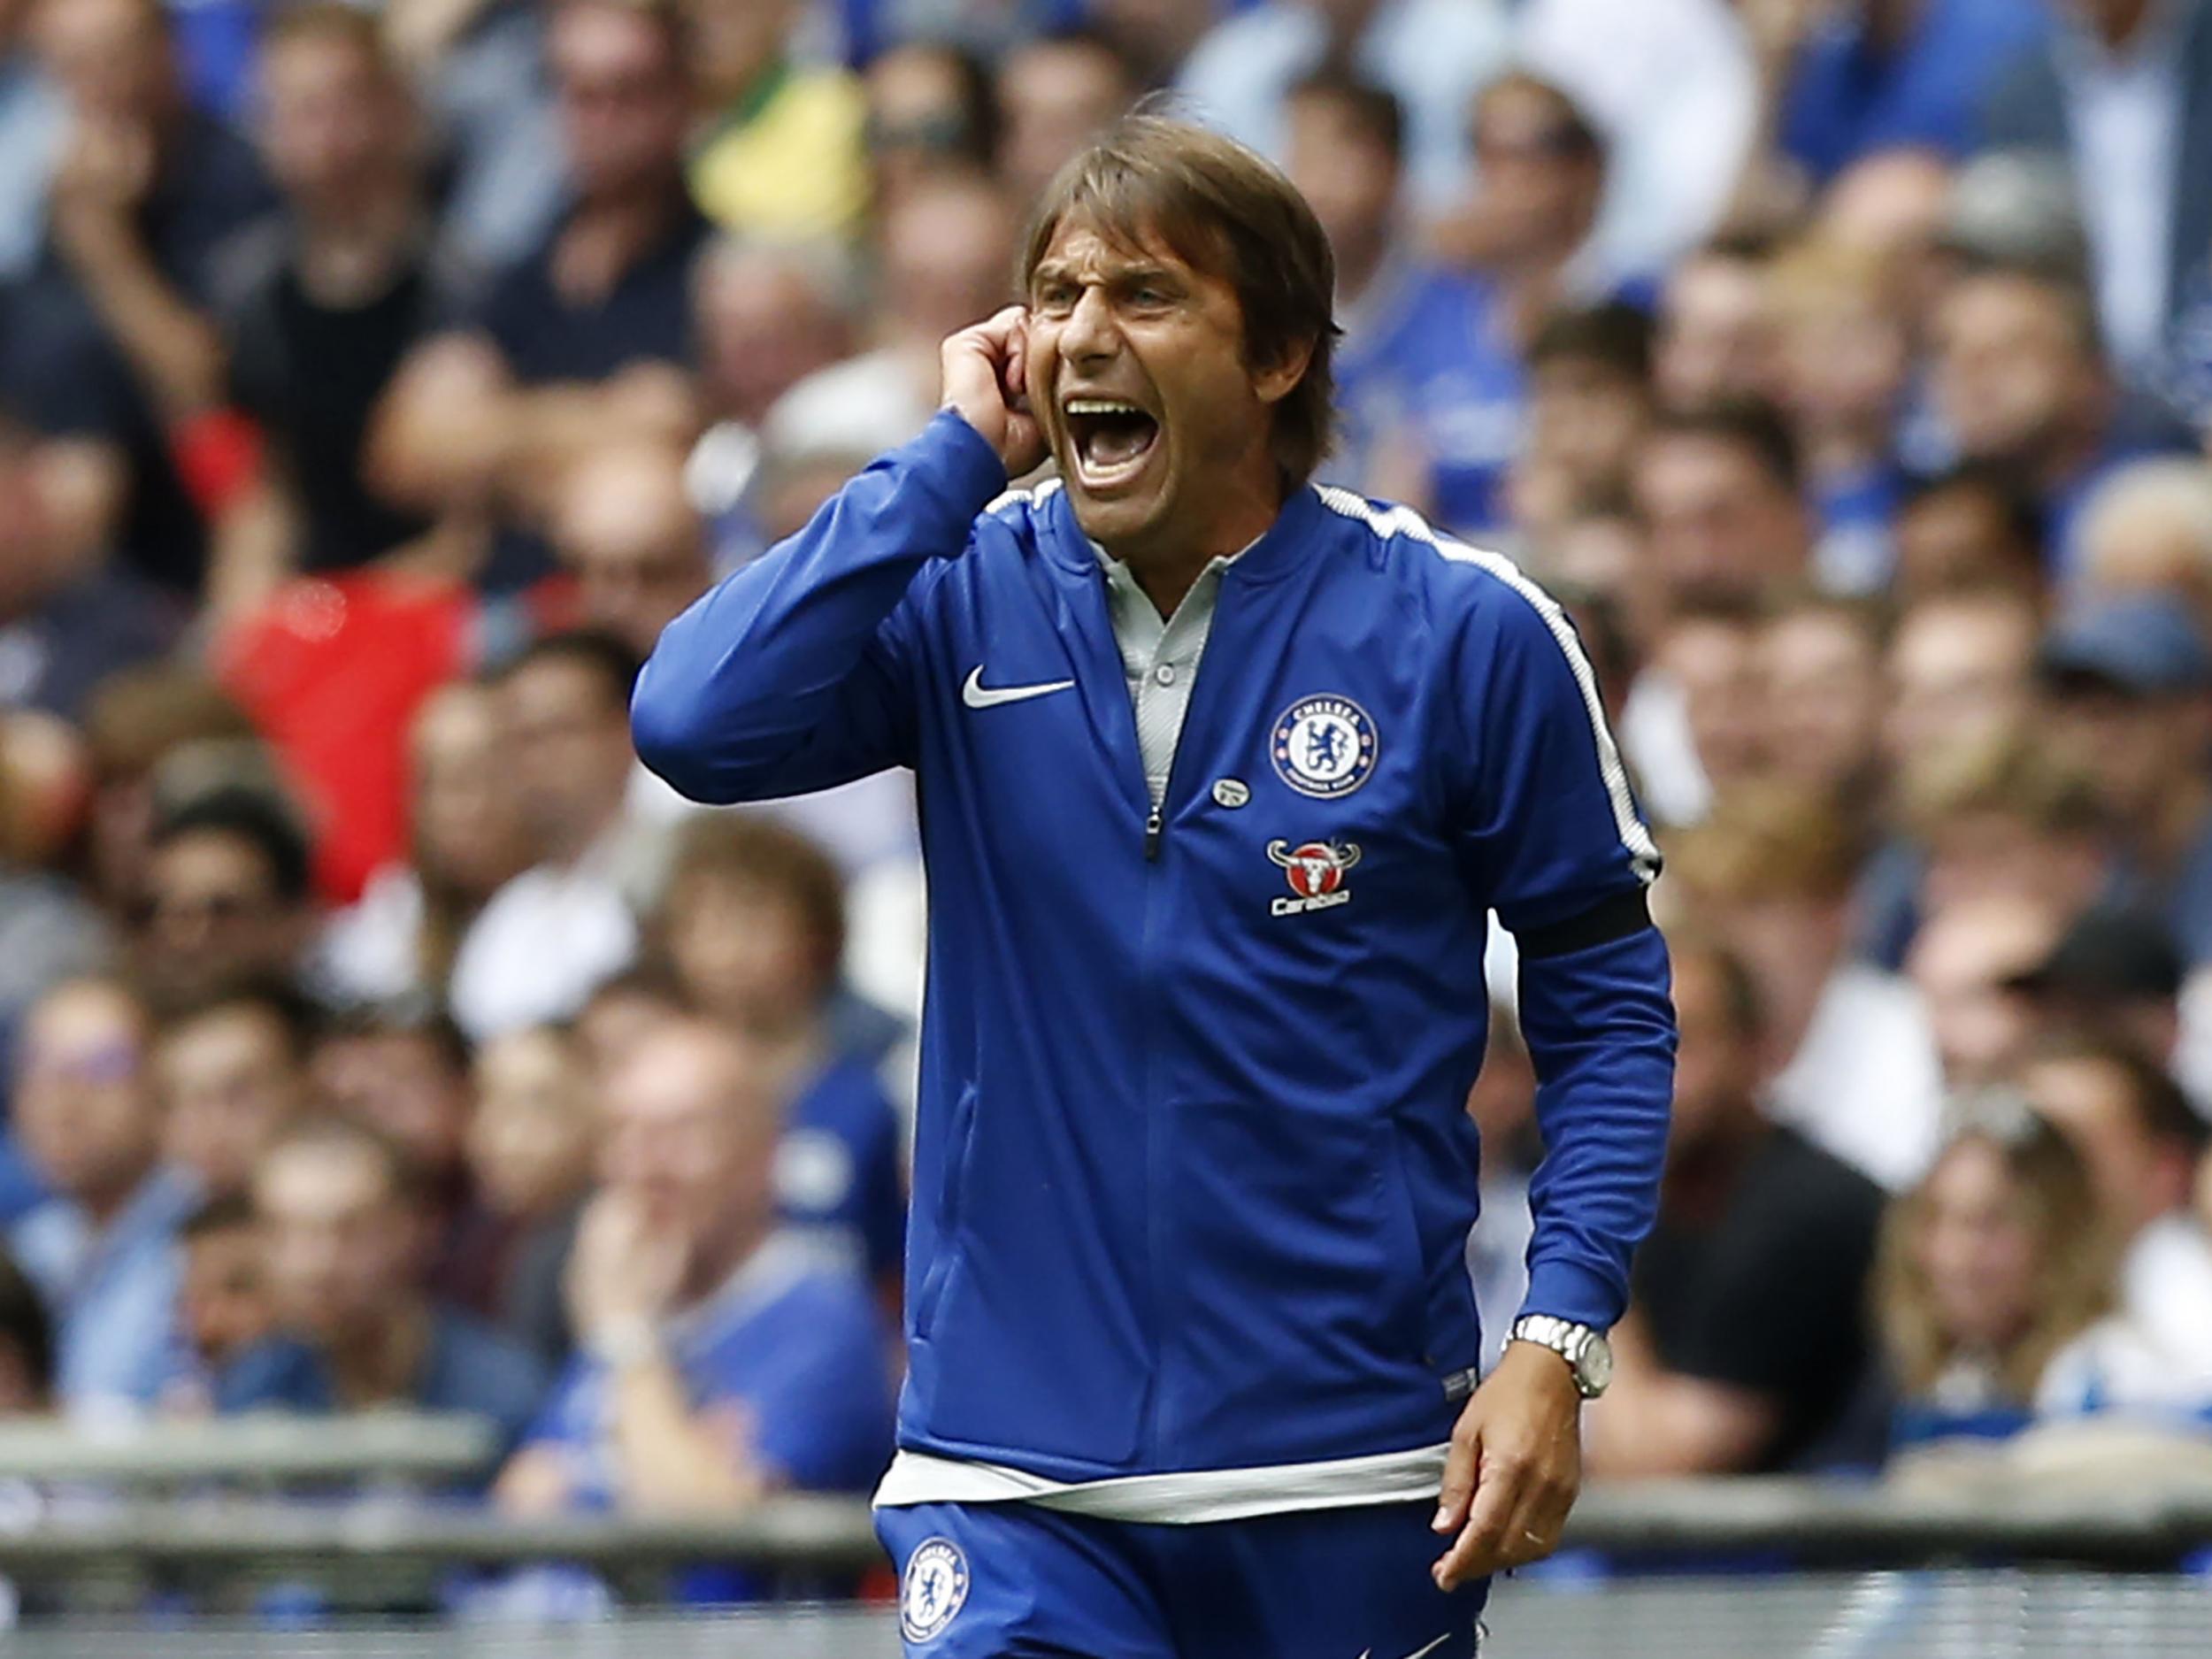 The Chelsea manager has cut an unhappy figure in pre-season